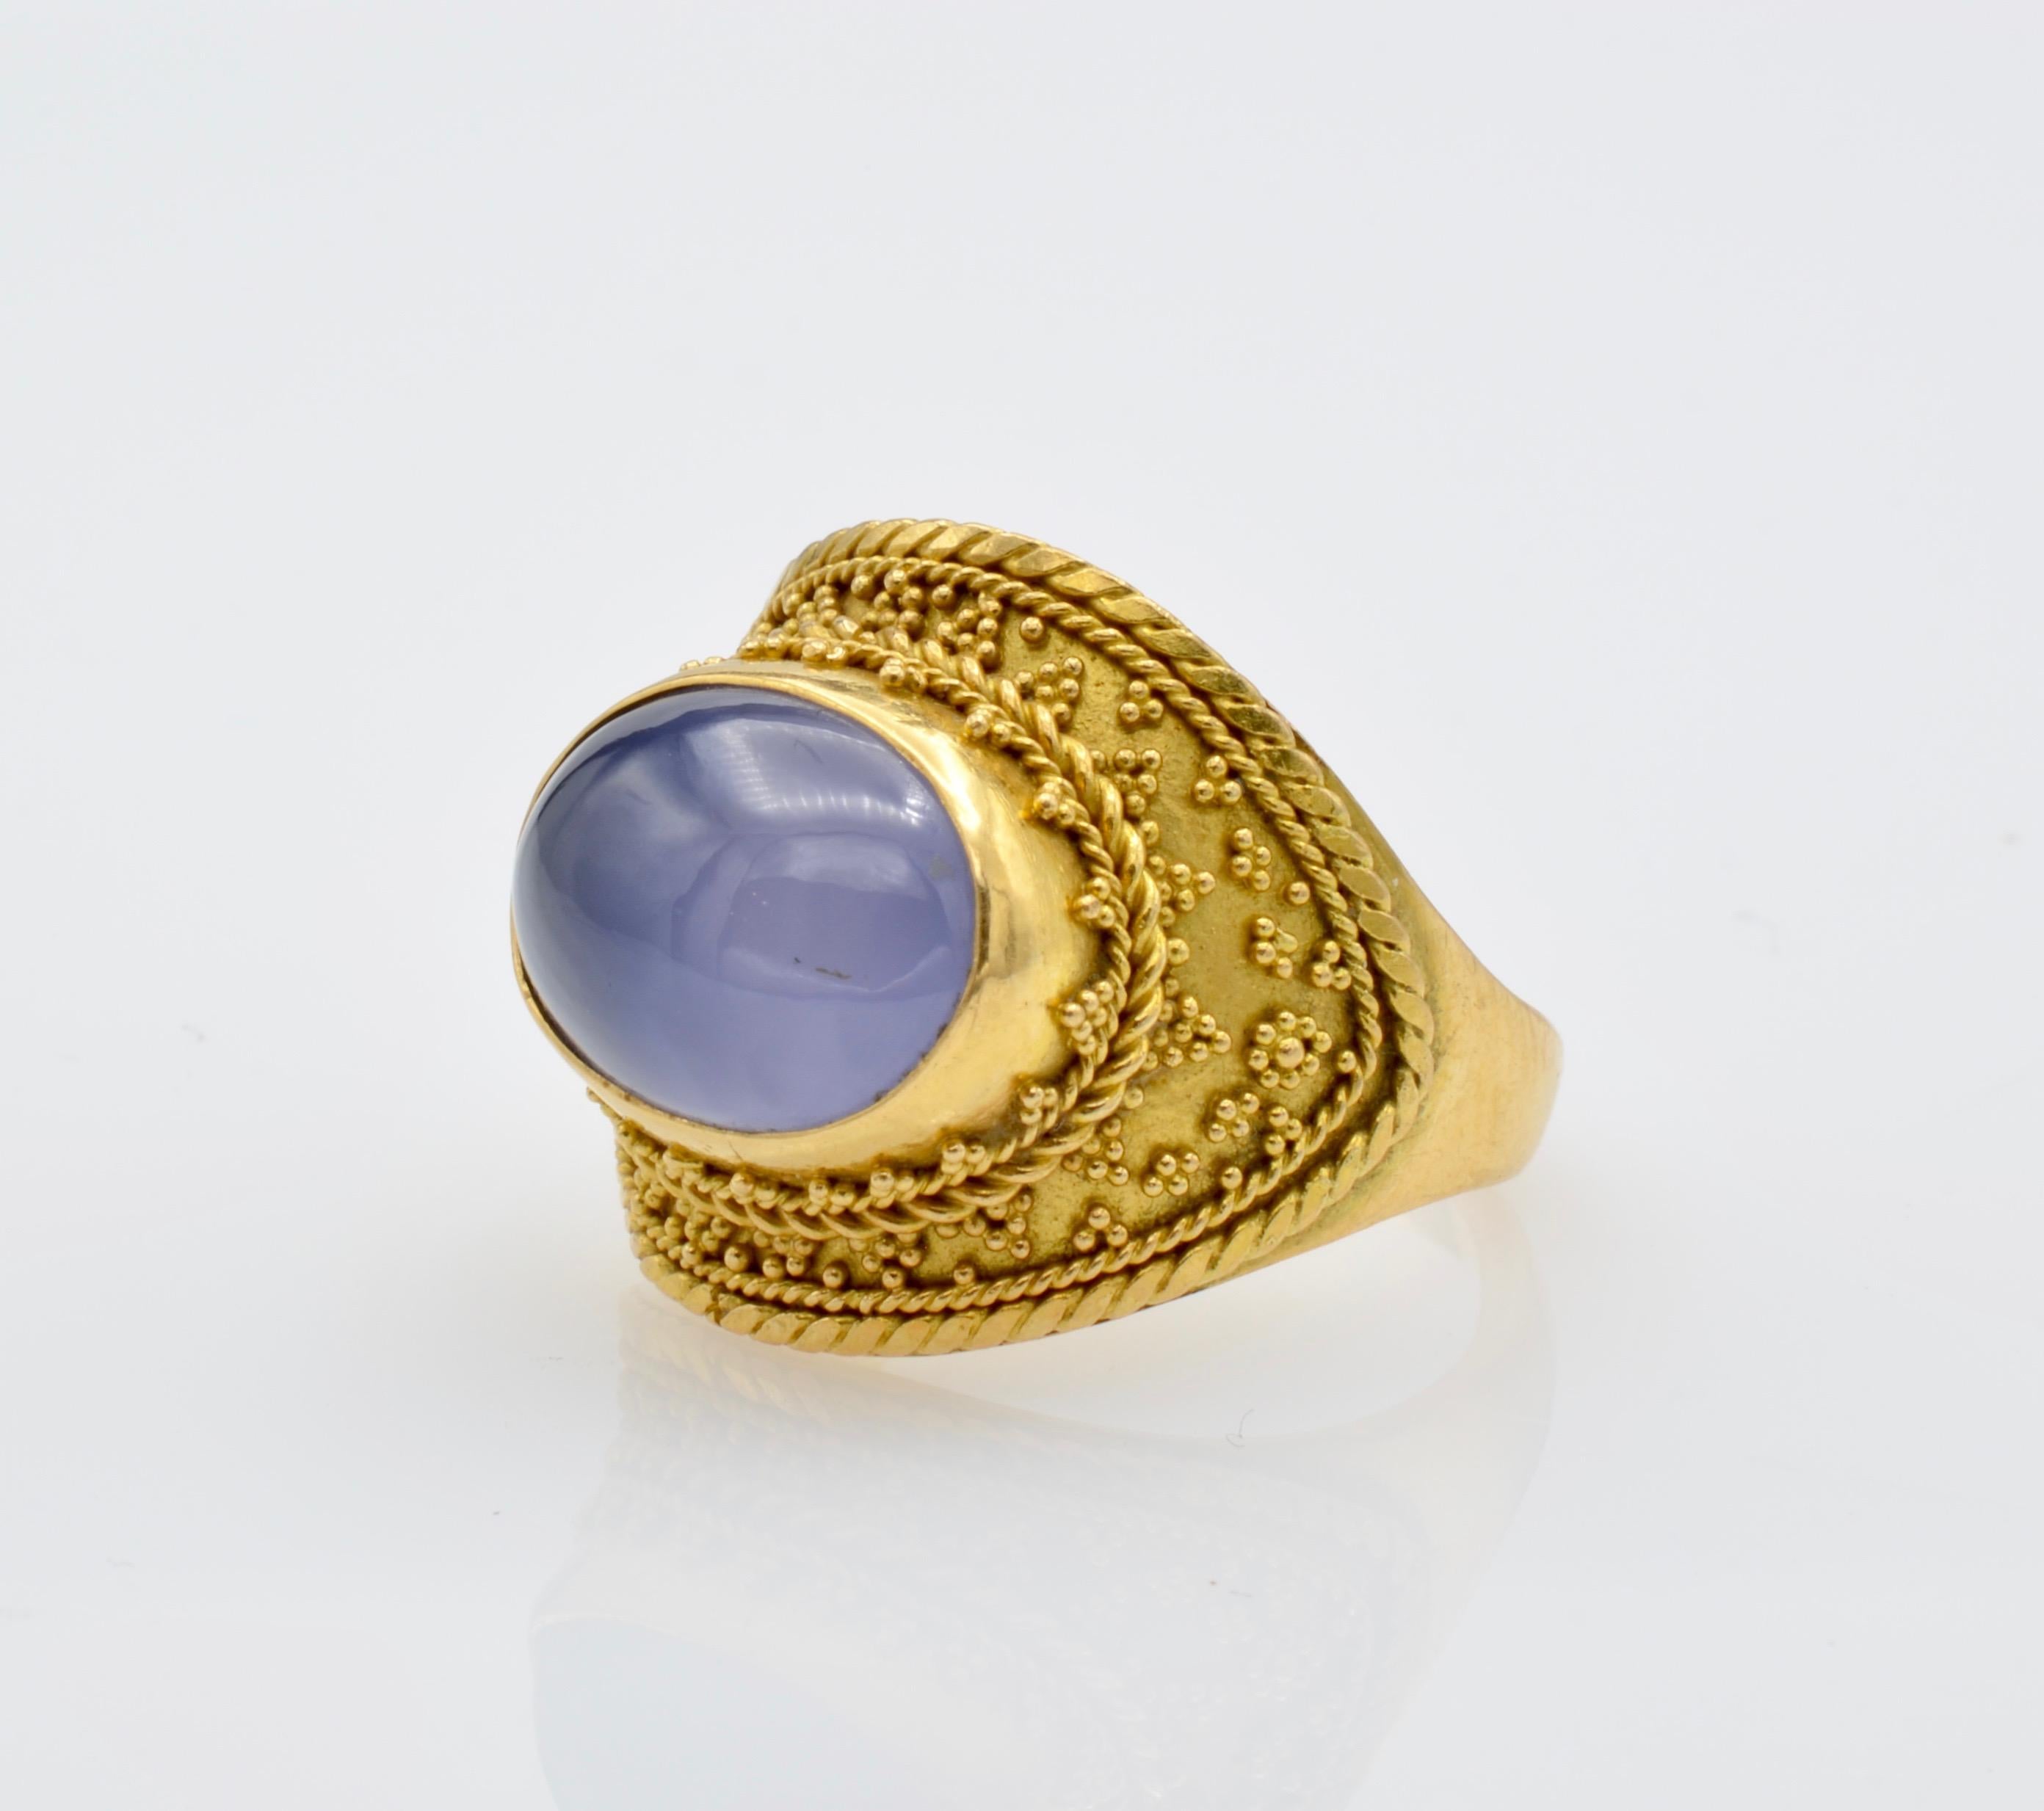 22 Karat Gold Granular Design Blue Chalcedony Ring In Excellent Condition For Sale In Berkeley, CA